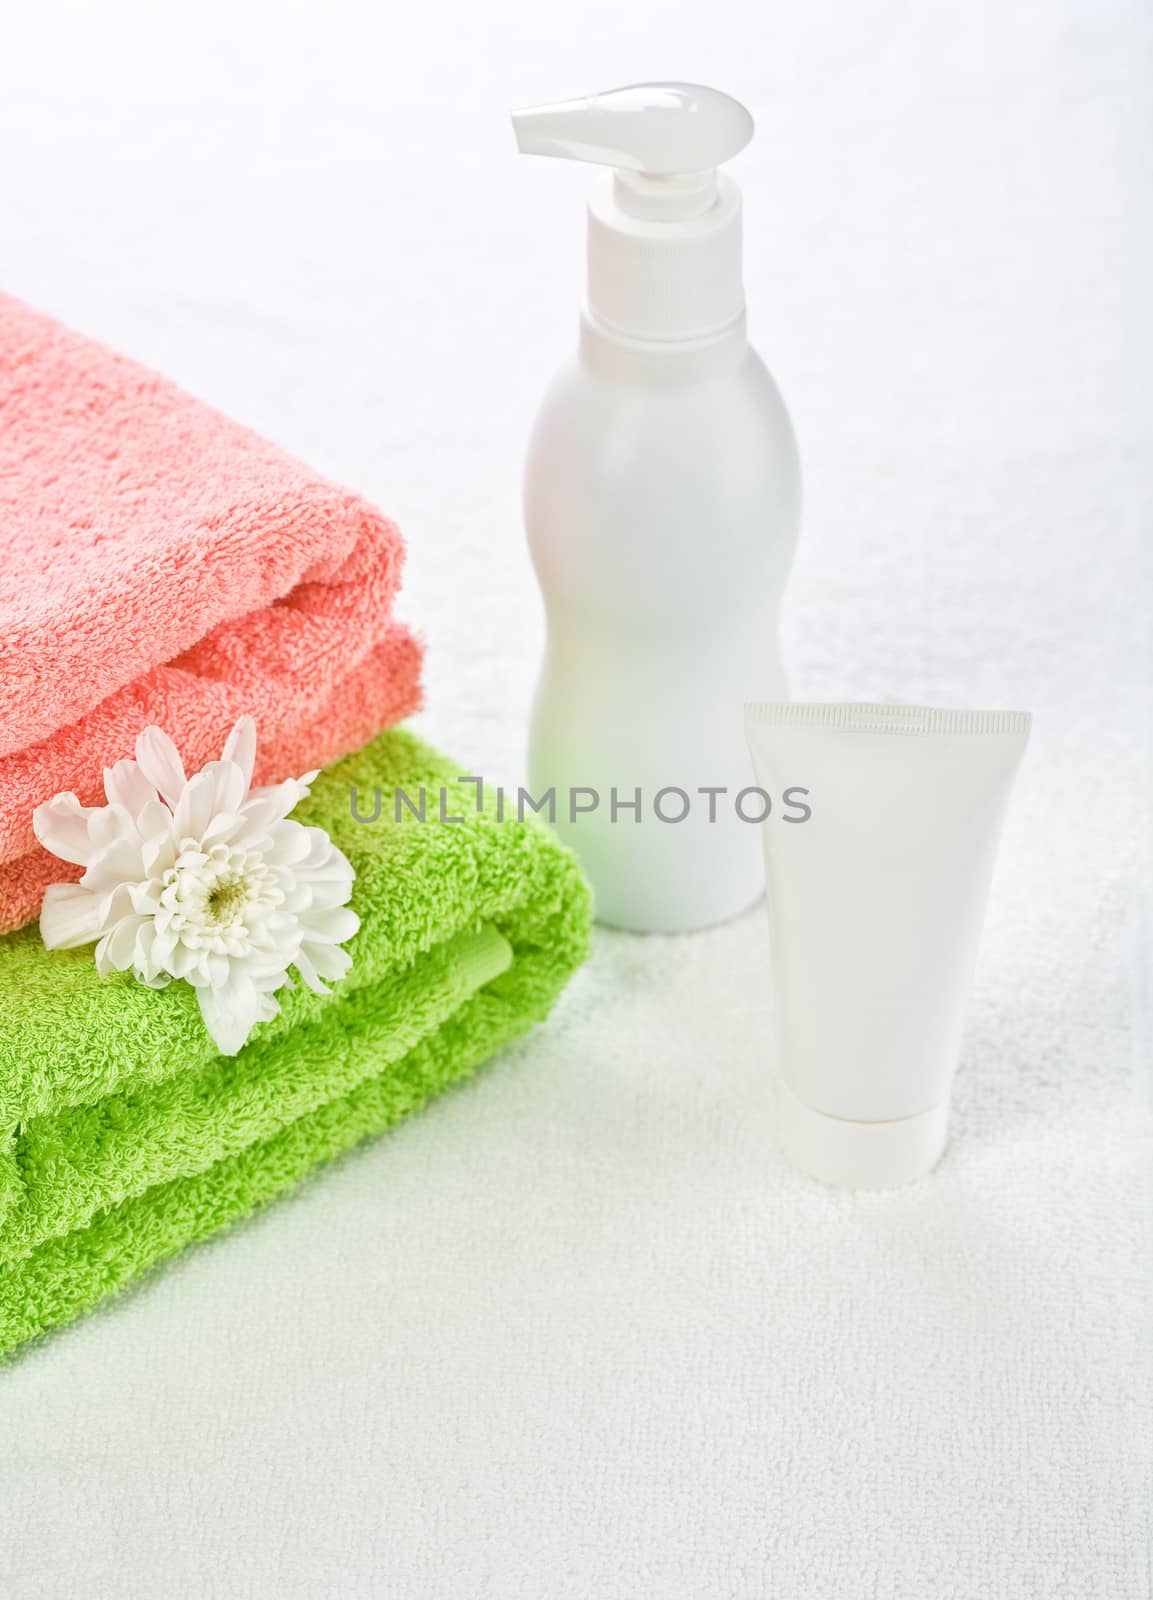 Accessories for bathing with flower
